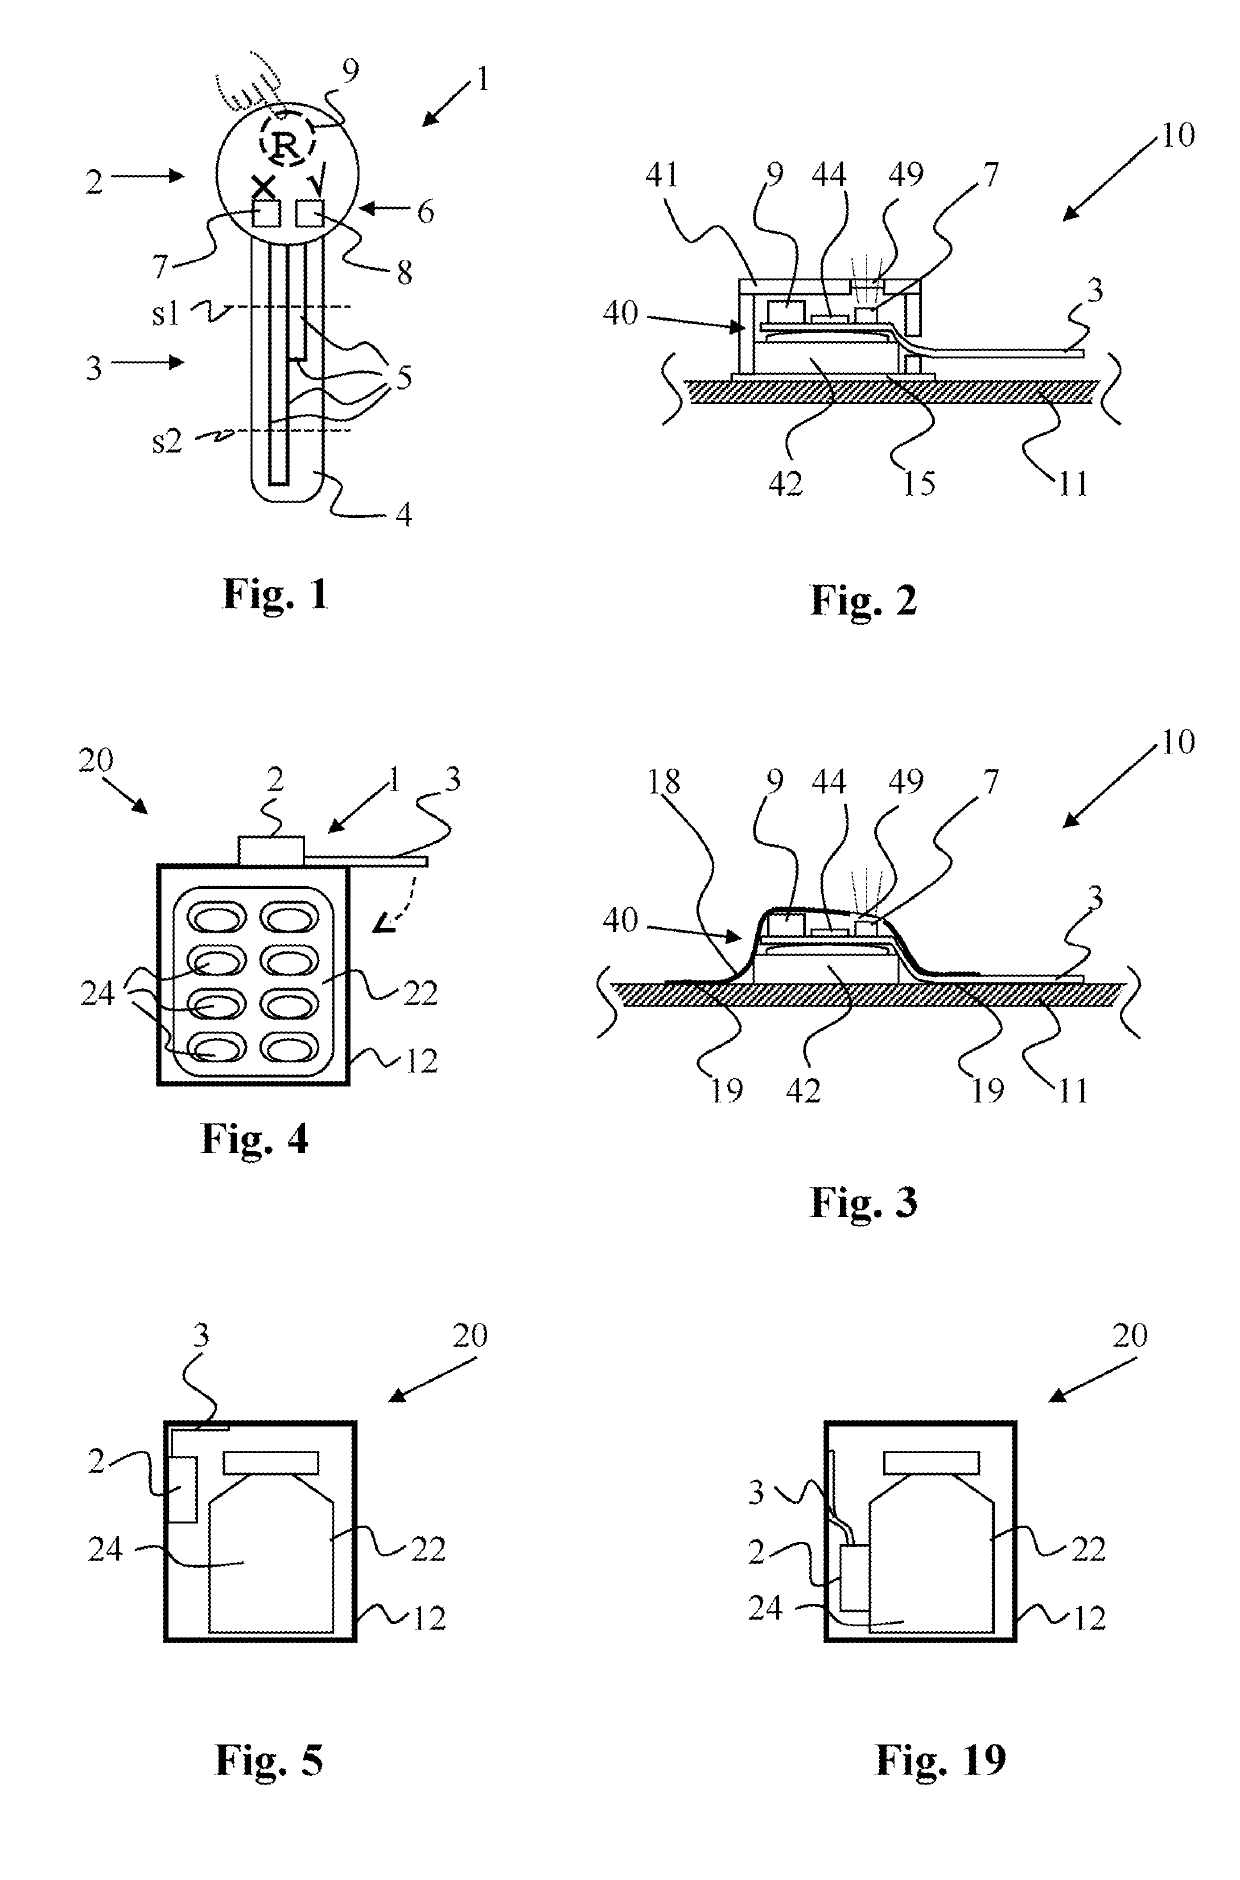 Package for pharmaceutical product, comprising miniaturized electronic tag for monitoring product integrity